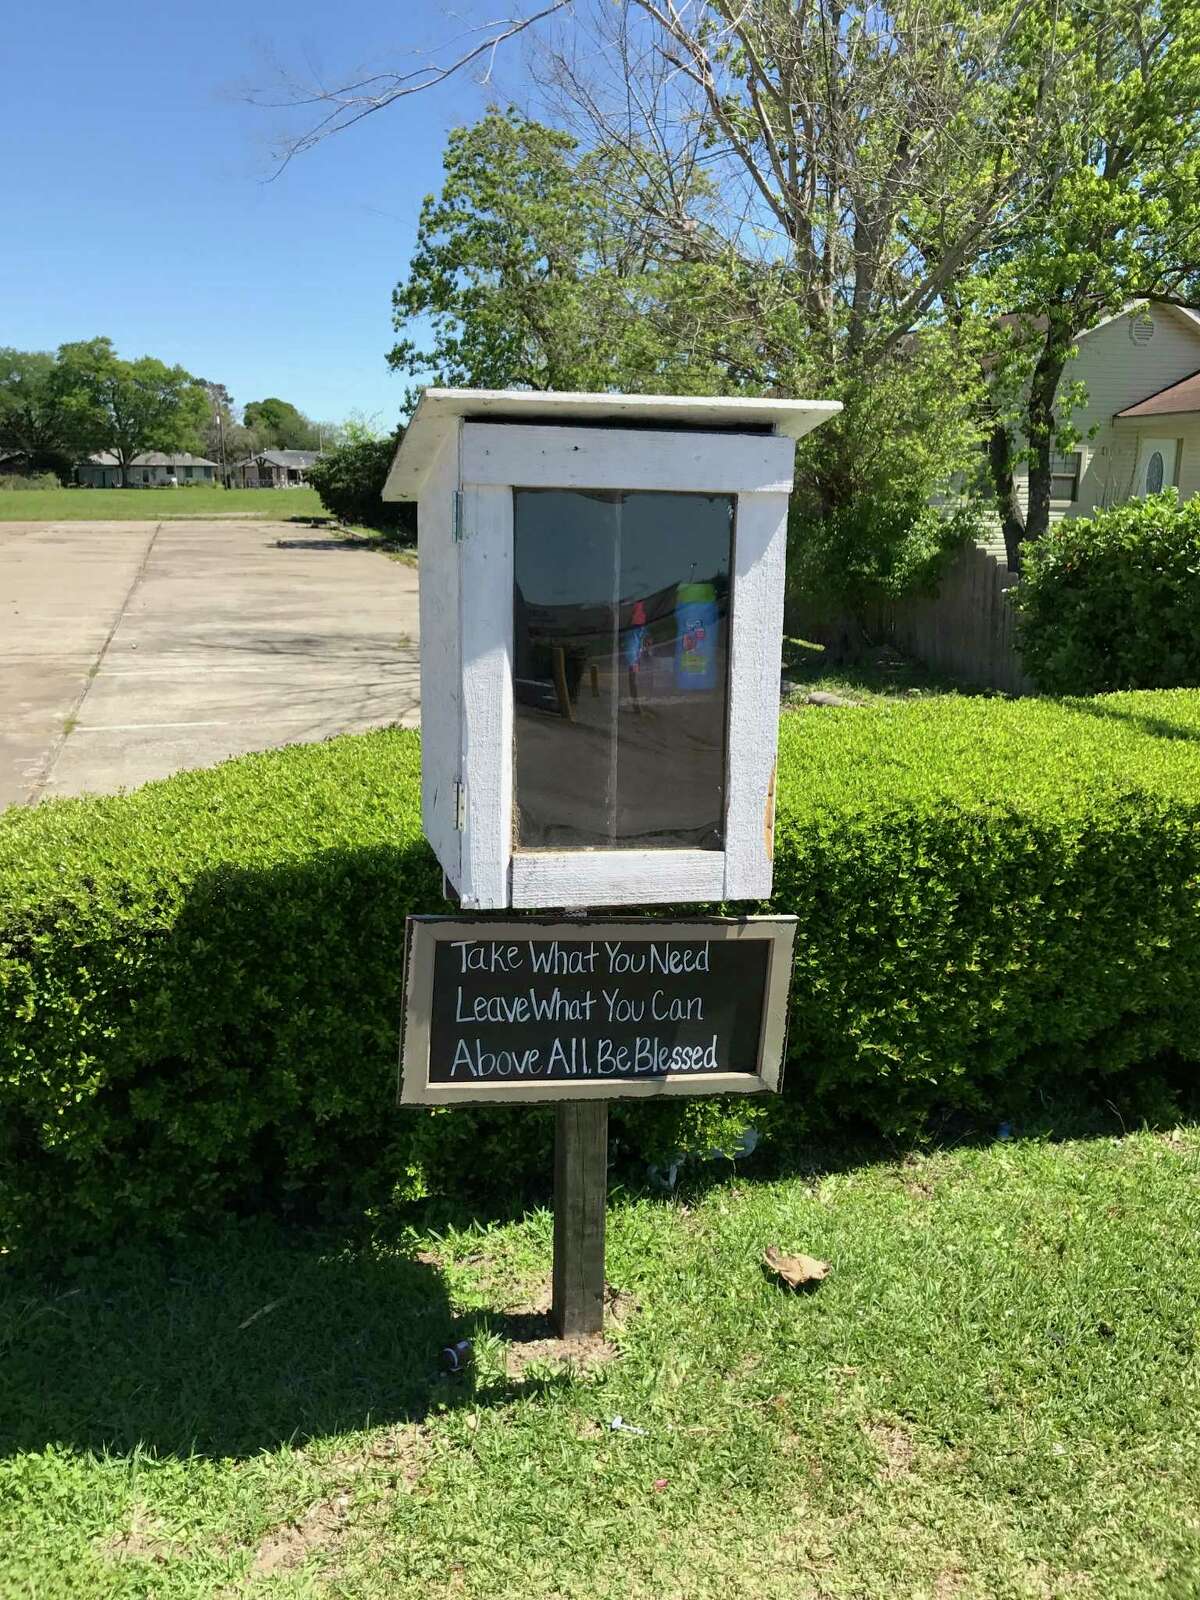 Albert Clavijo recently installed a second blessing box after the first one that he set up in December became so popular.